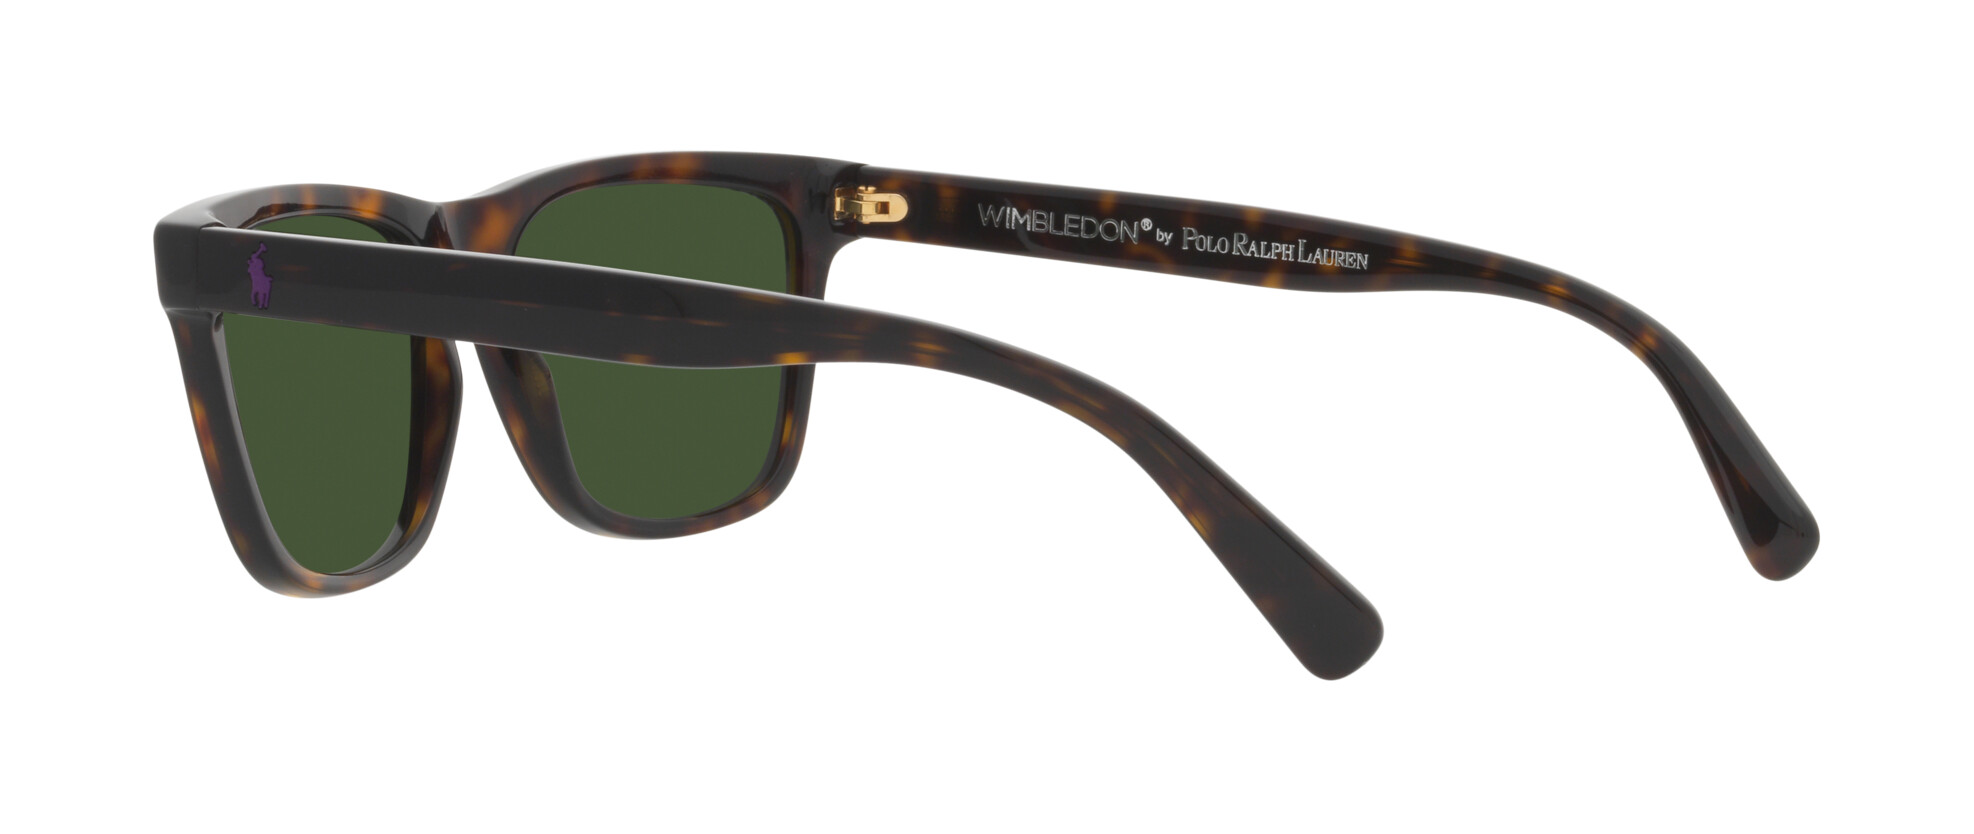 [products.image.angle_right02] Polo Ralph Lauren 0PH4167 500371 Sonnenbrille